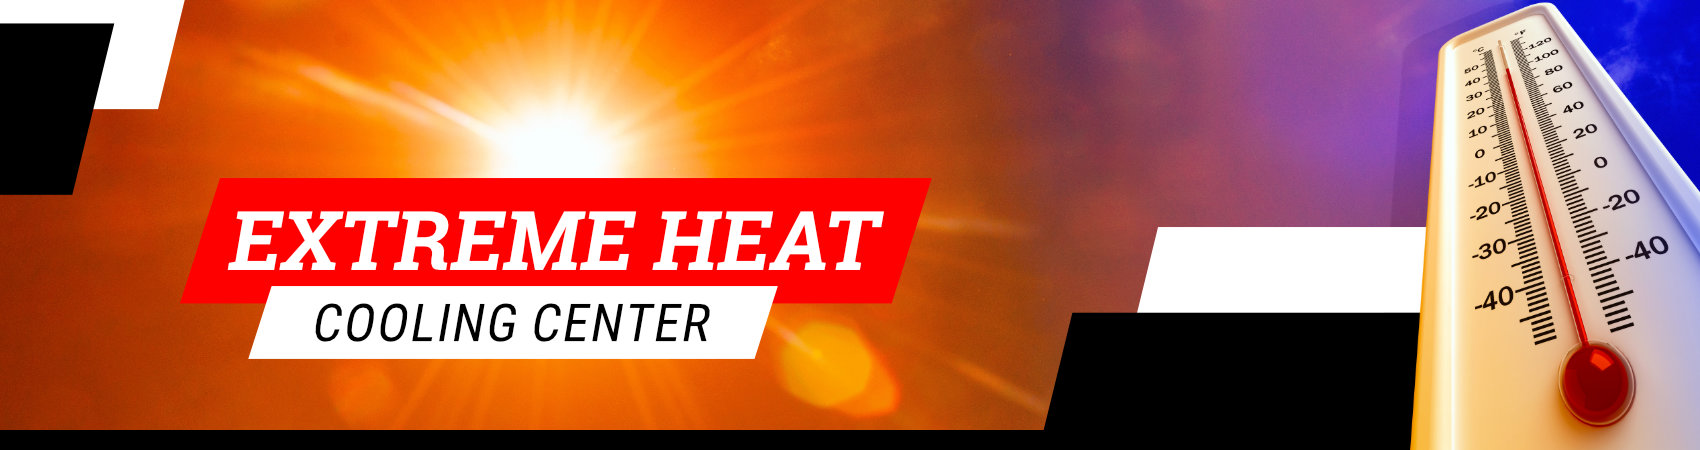 Extreme Heat Cooling Center News Notice with clickable link